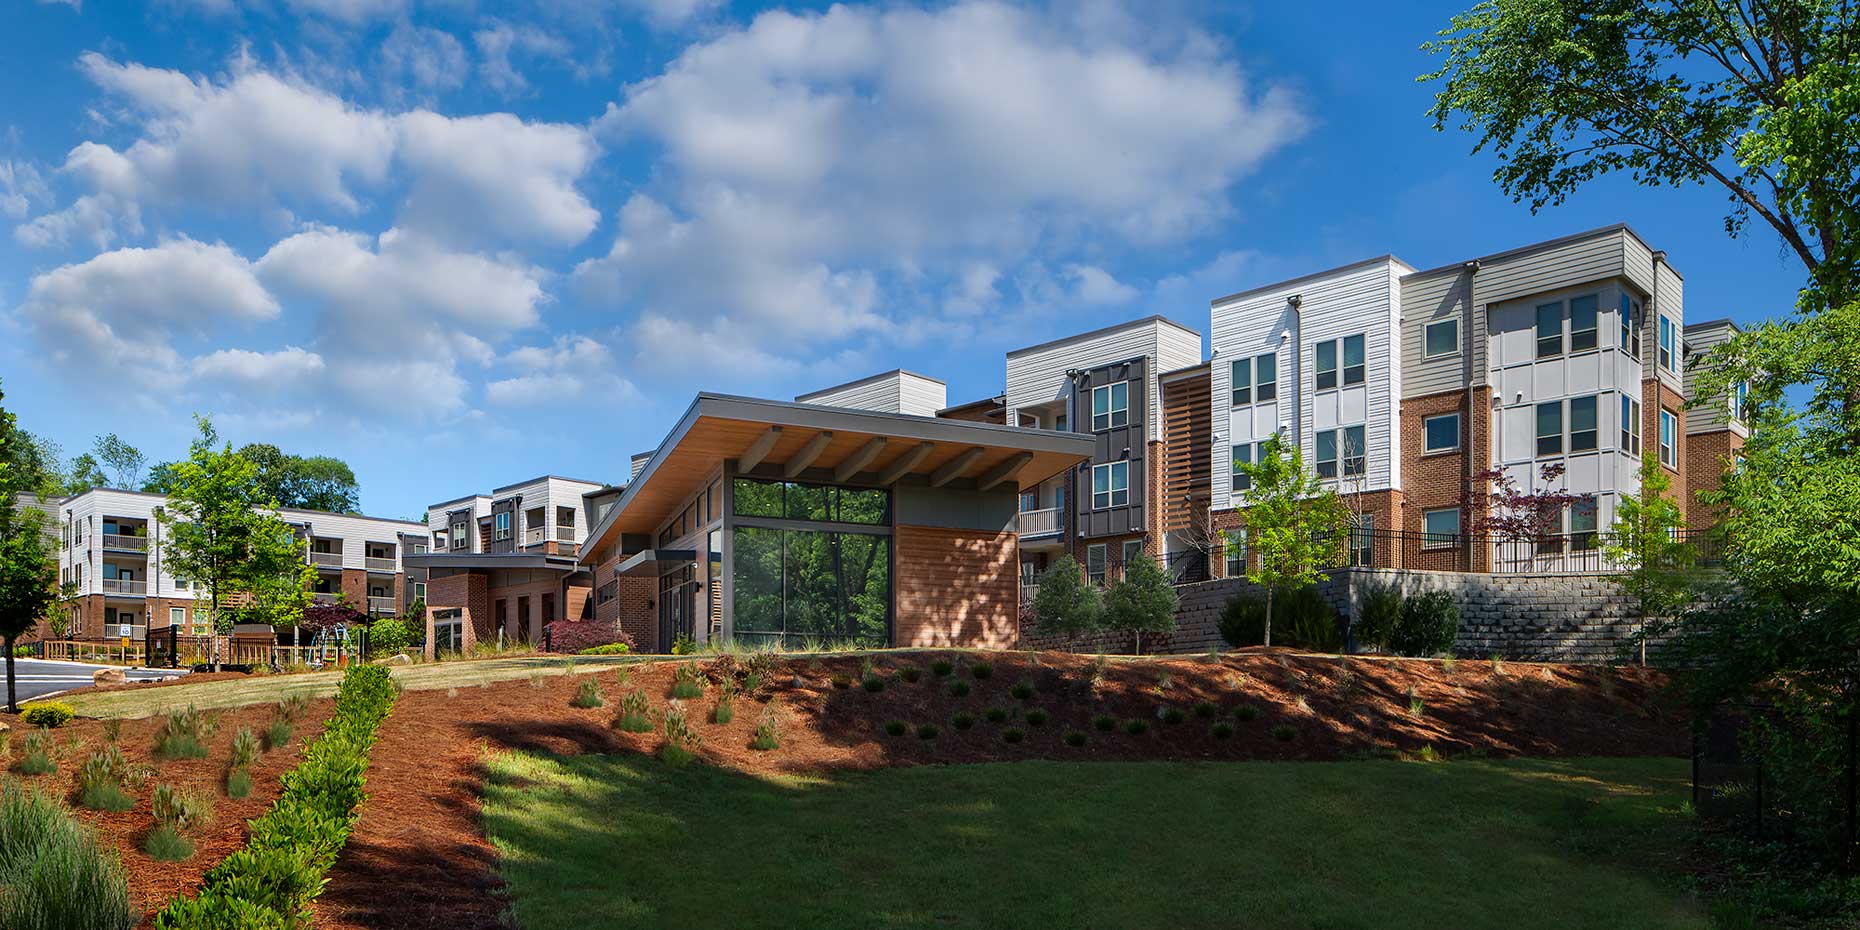 A pastoral setting surrounds the buildings of the Gardenside at Villages of East Lake